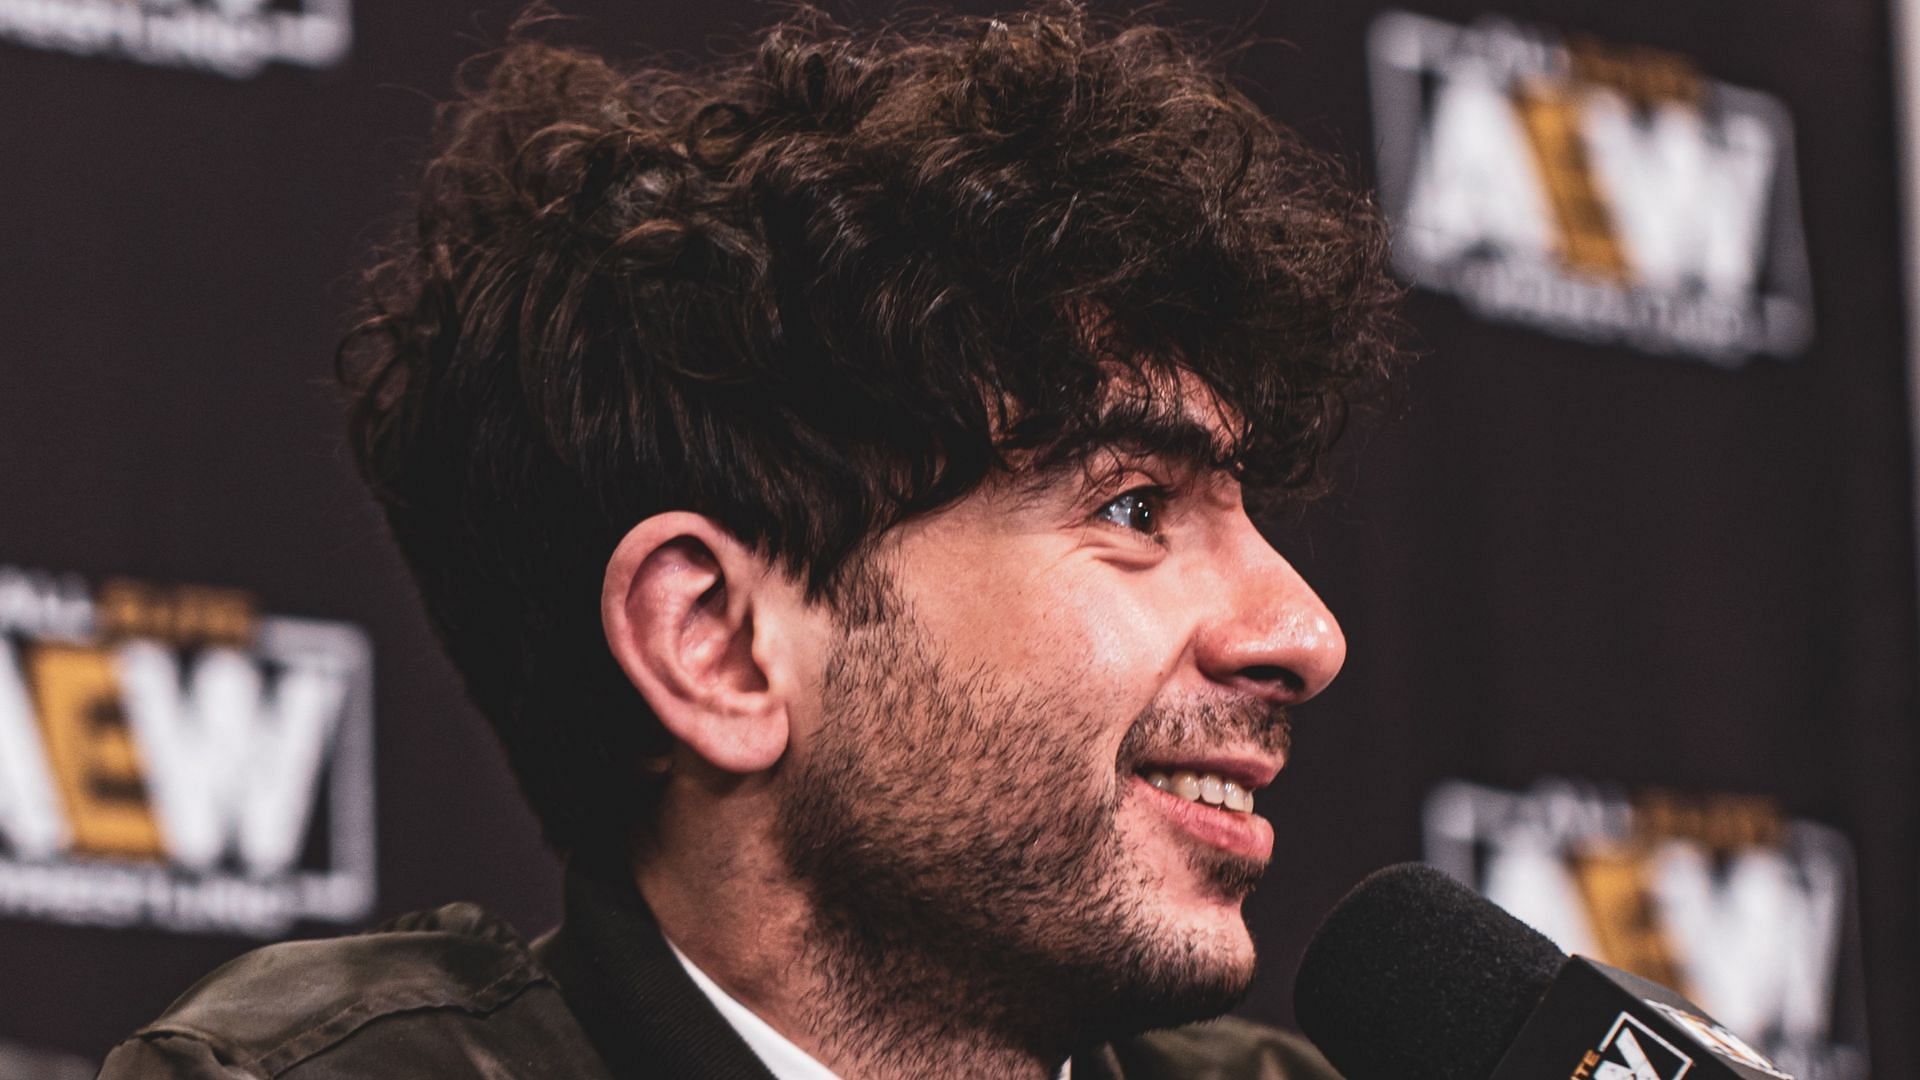 Tony Khan at the AEW Double or Nothing 2022 media scrum (credit: Jay Lee Photography)